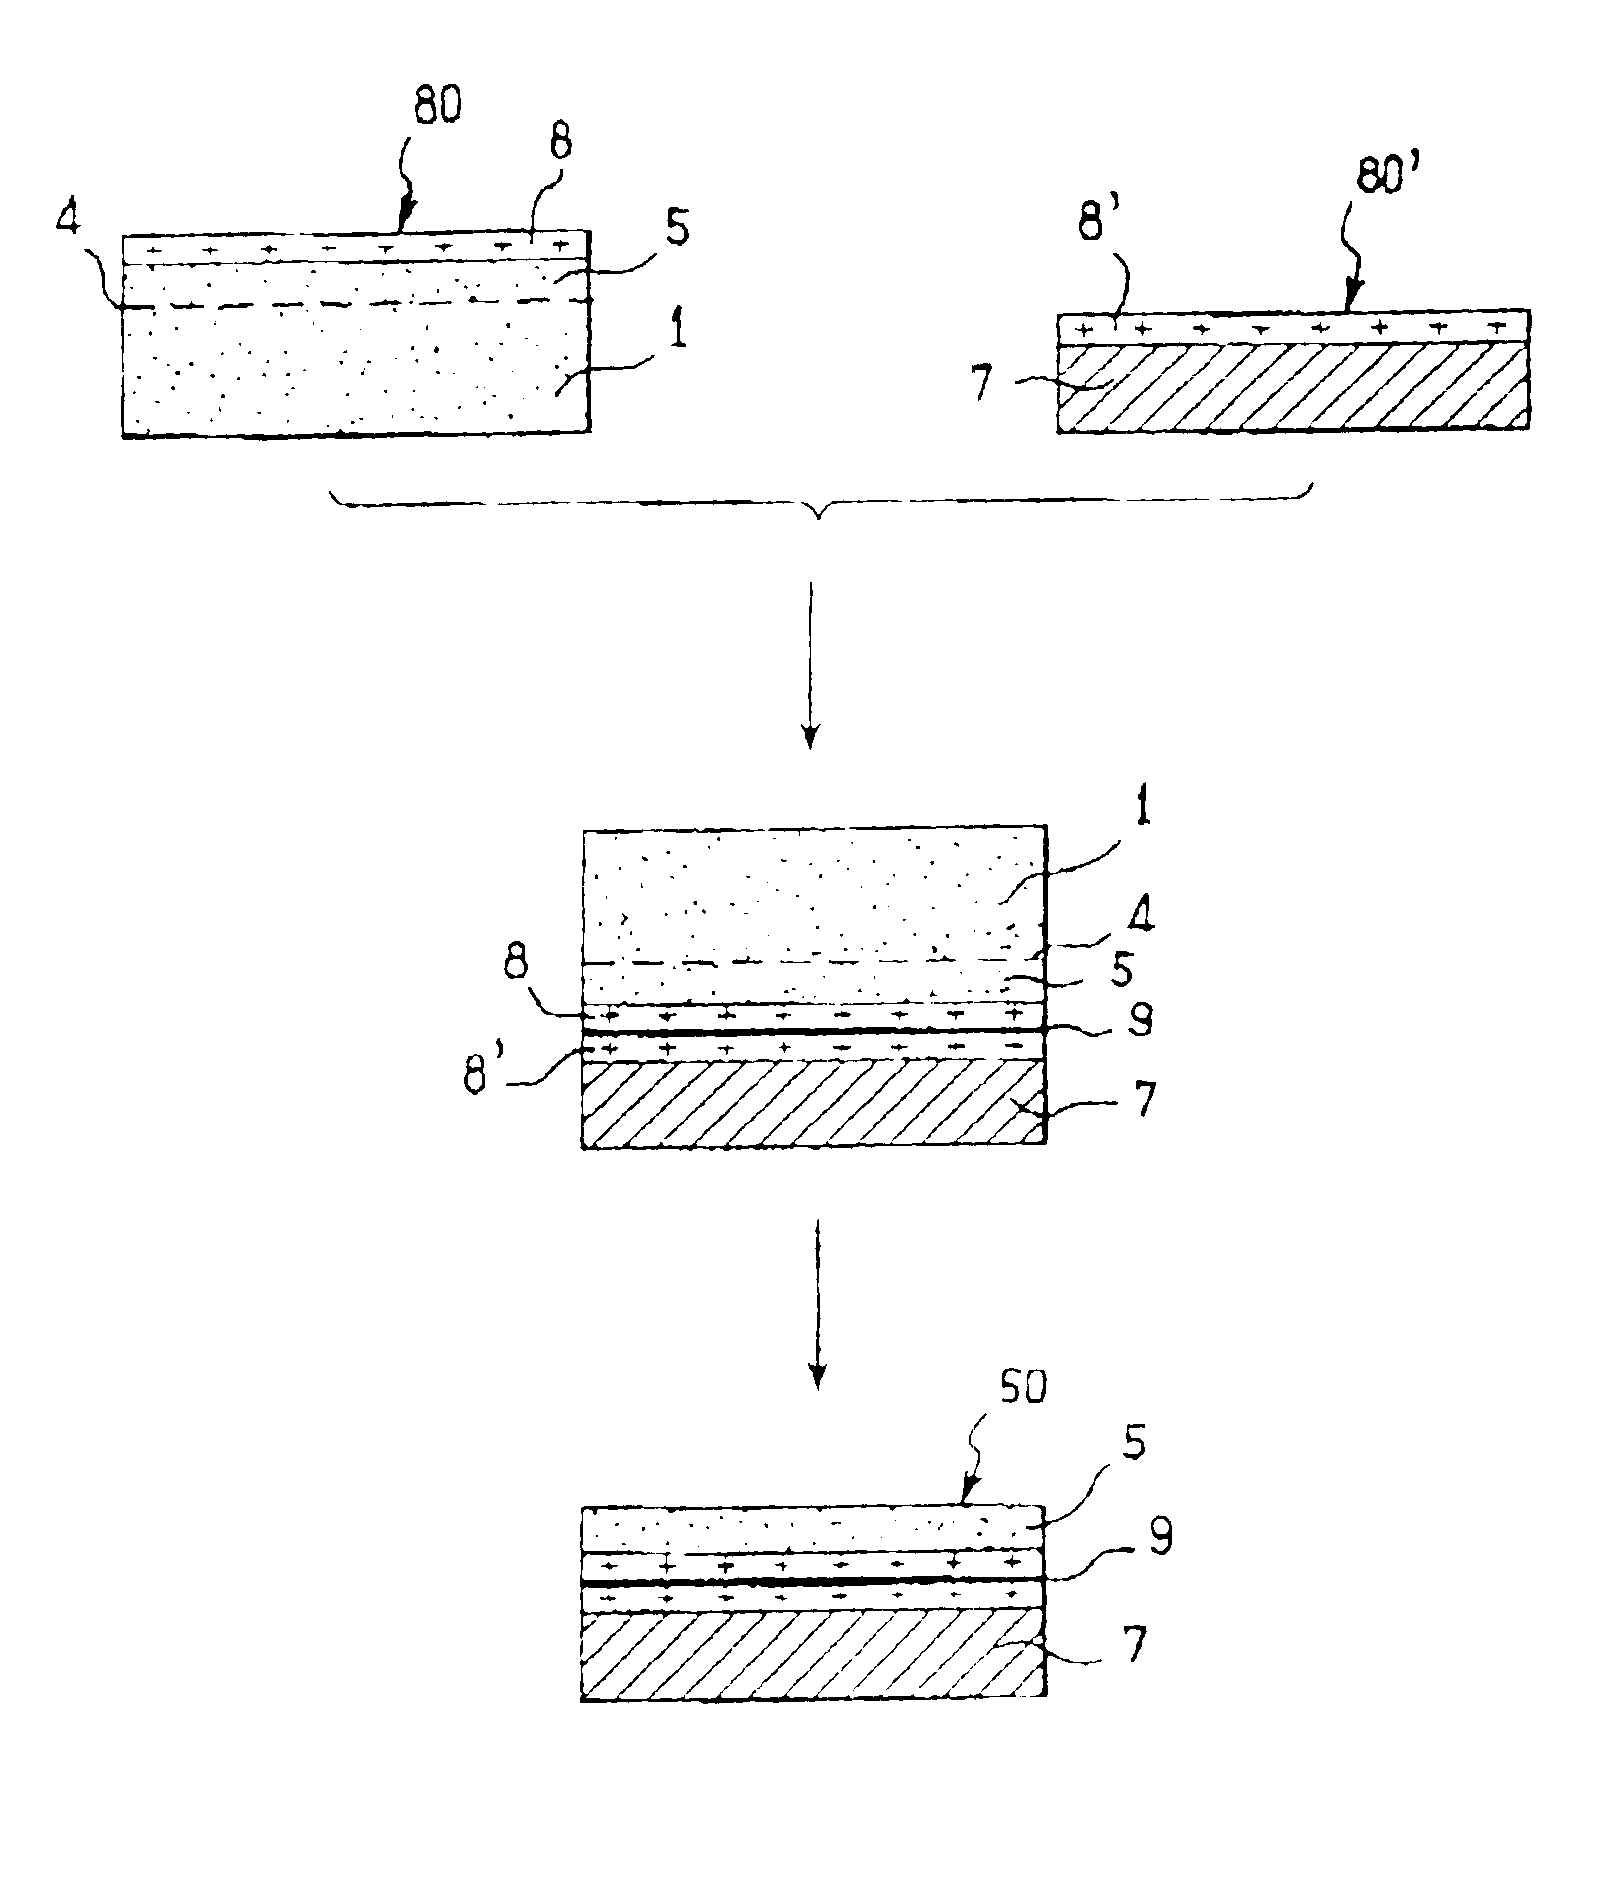 Method of manufacturing a free-standing substrate made of monocrystalline semi-conductor material